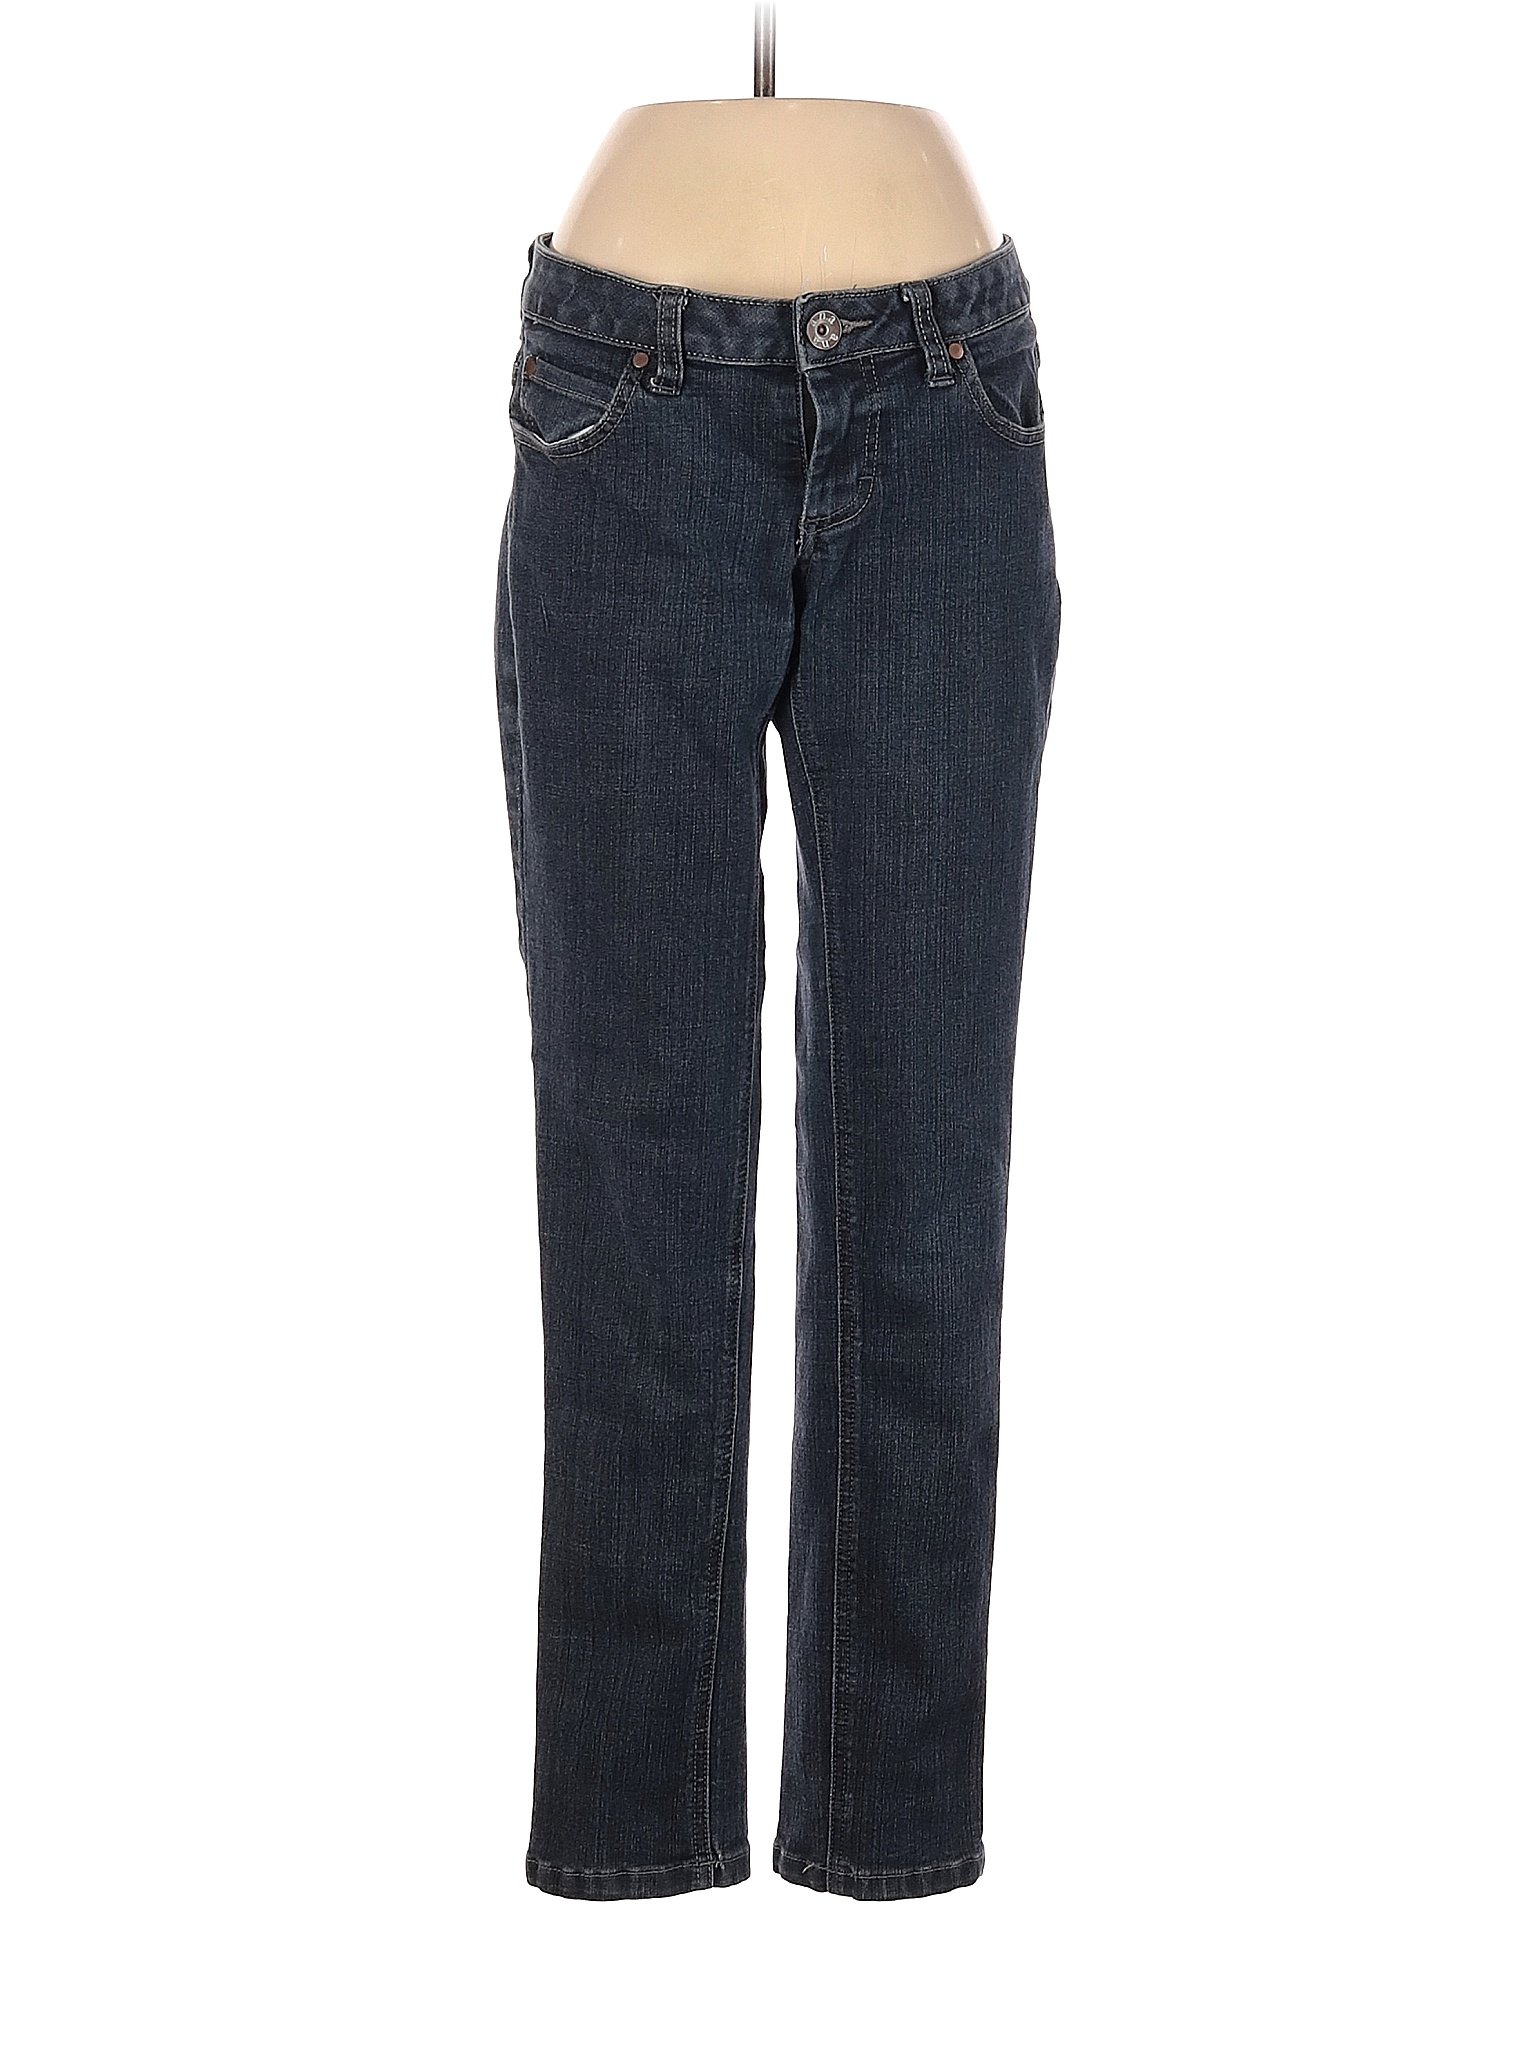 a.n.a. A New Approach Solid Blue Jeans Size 4 - 70% off | thredUP